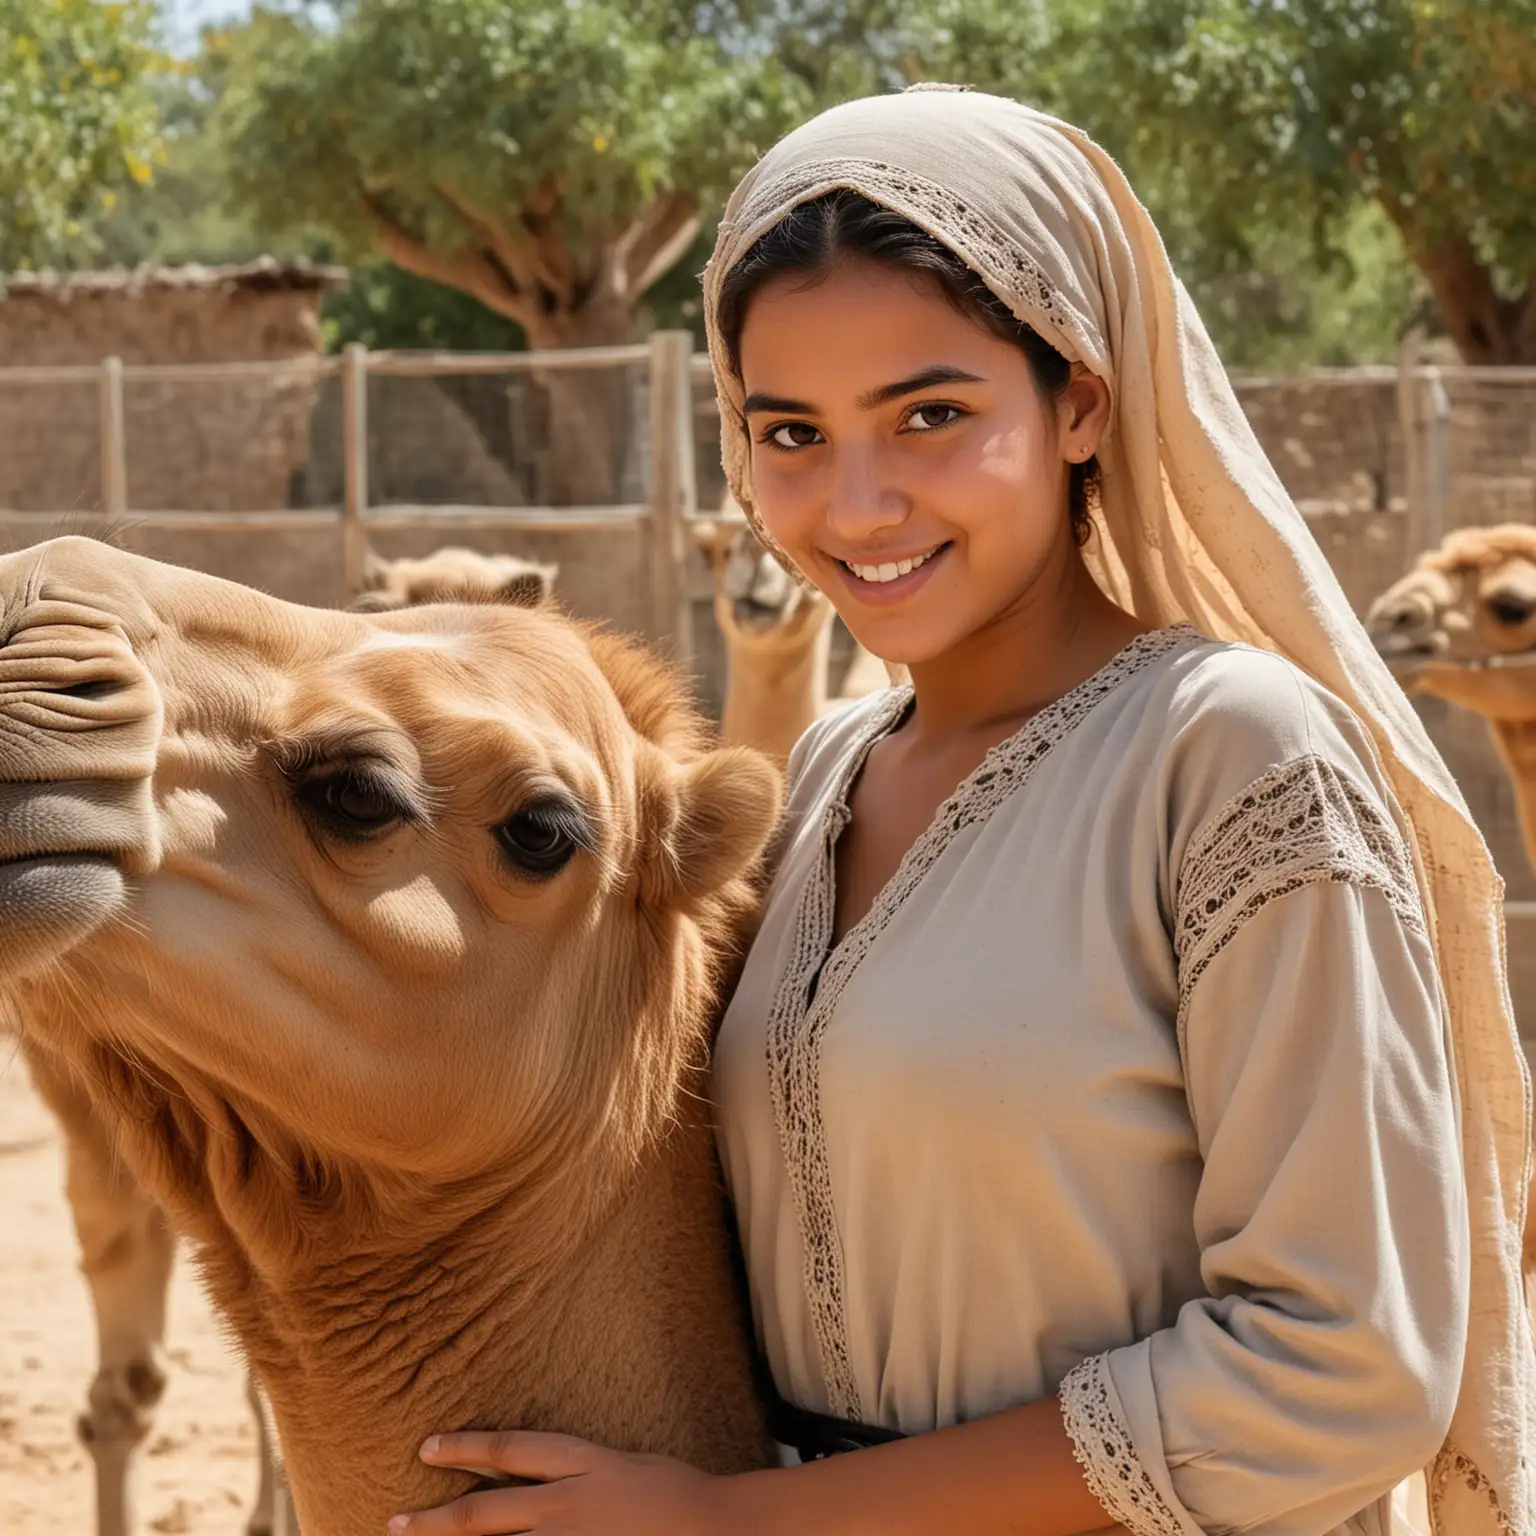 Cheerful Teenage Camel Keeper Pretty Girl from Tunisia with a Large Bust